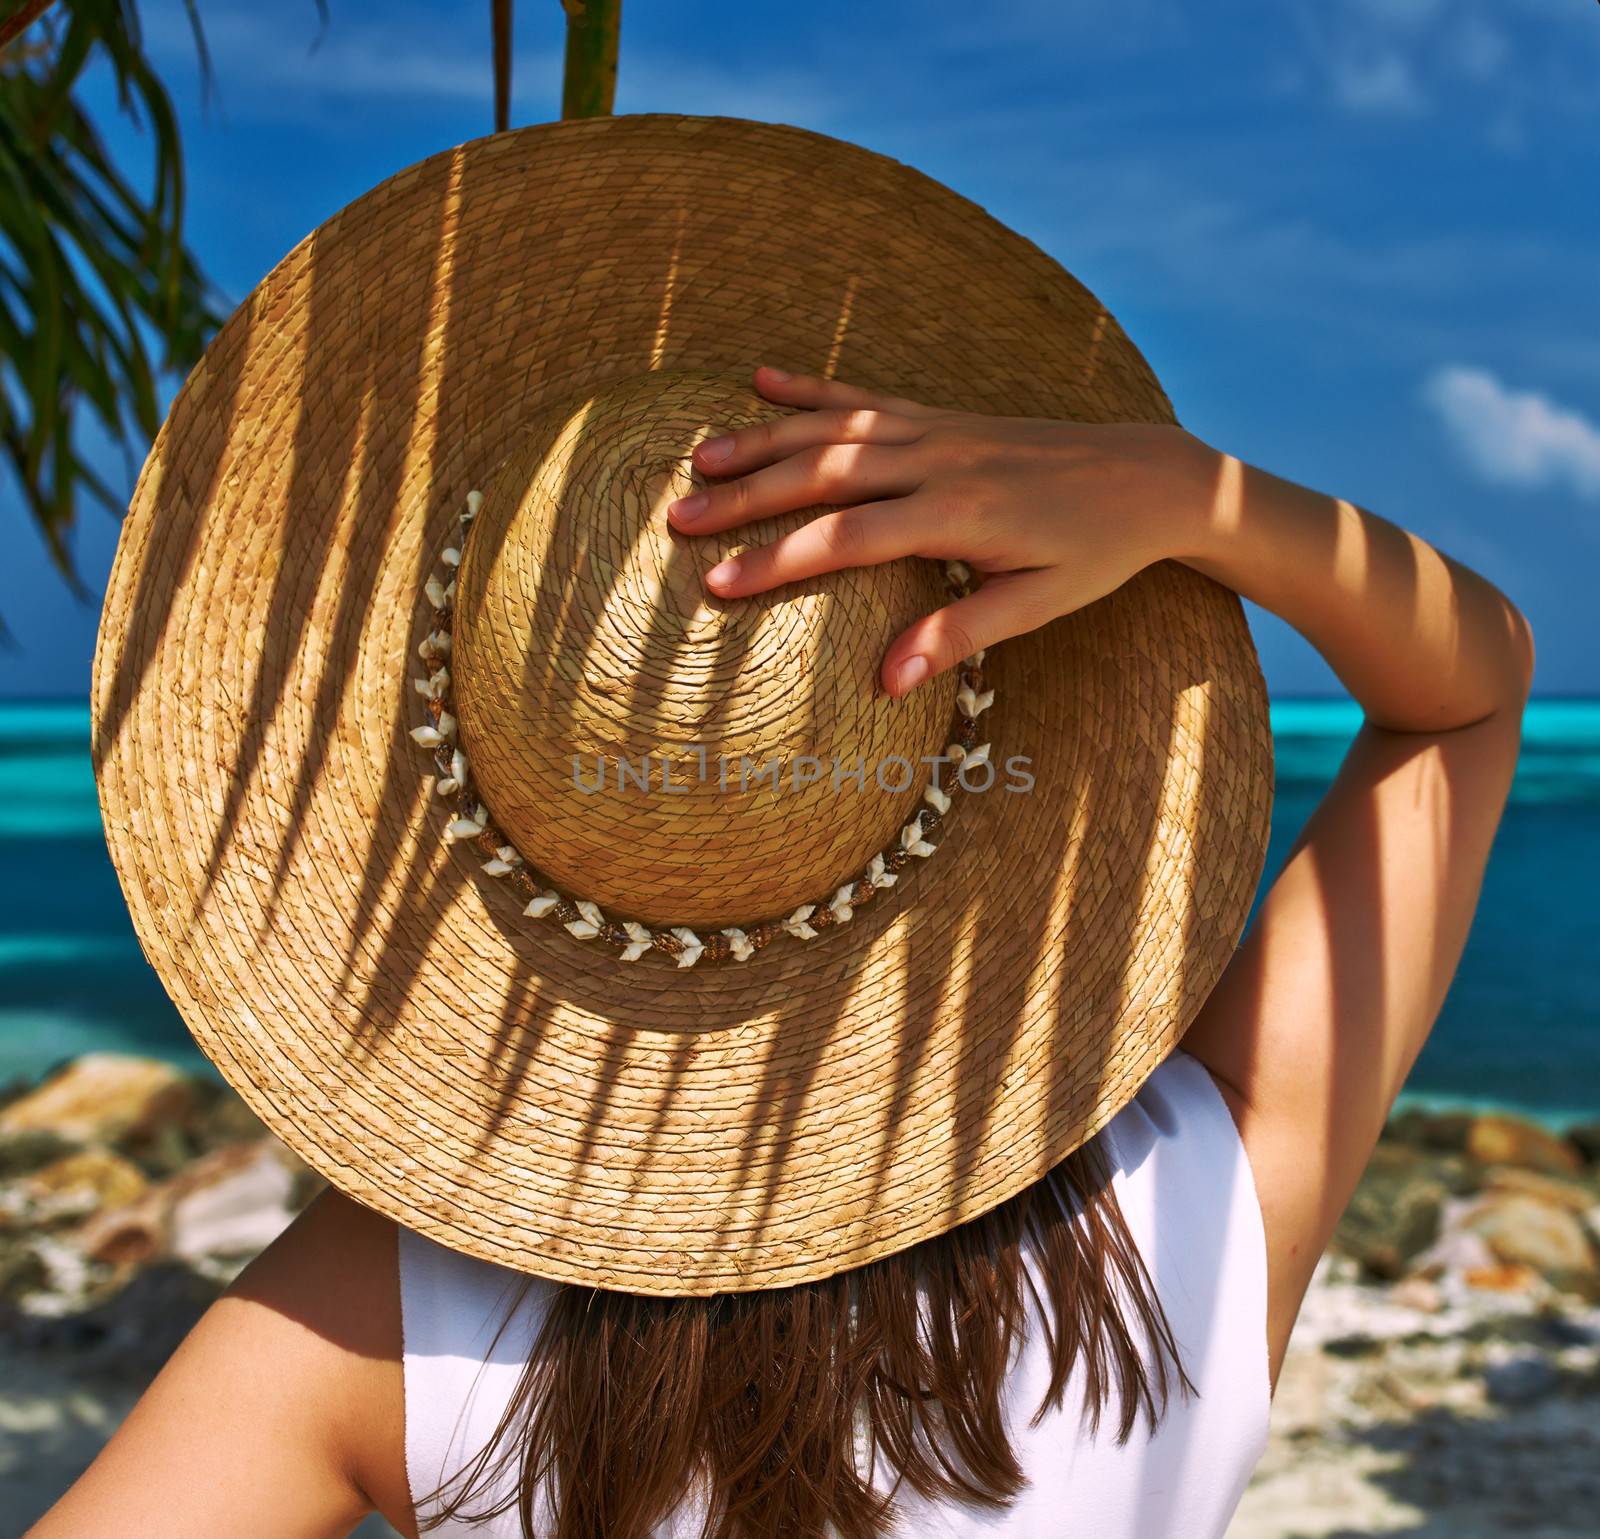 Woman with sun hat at beach by haveseen